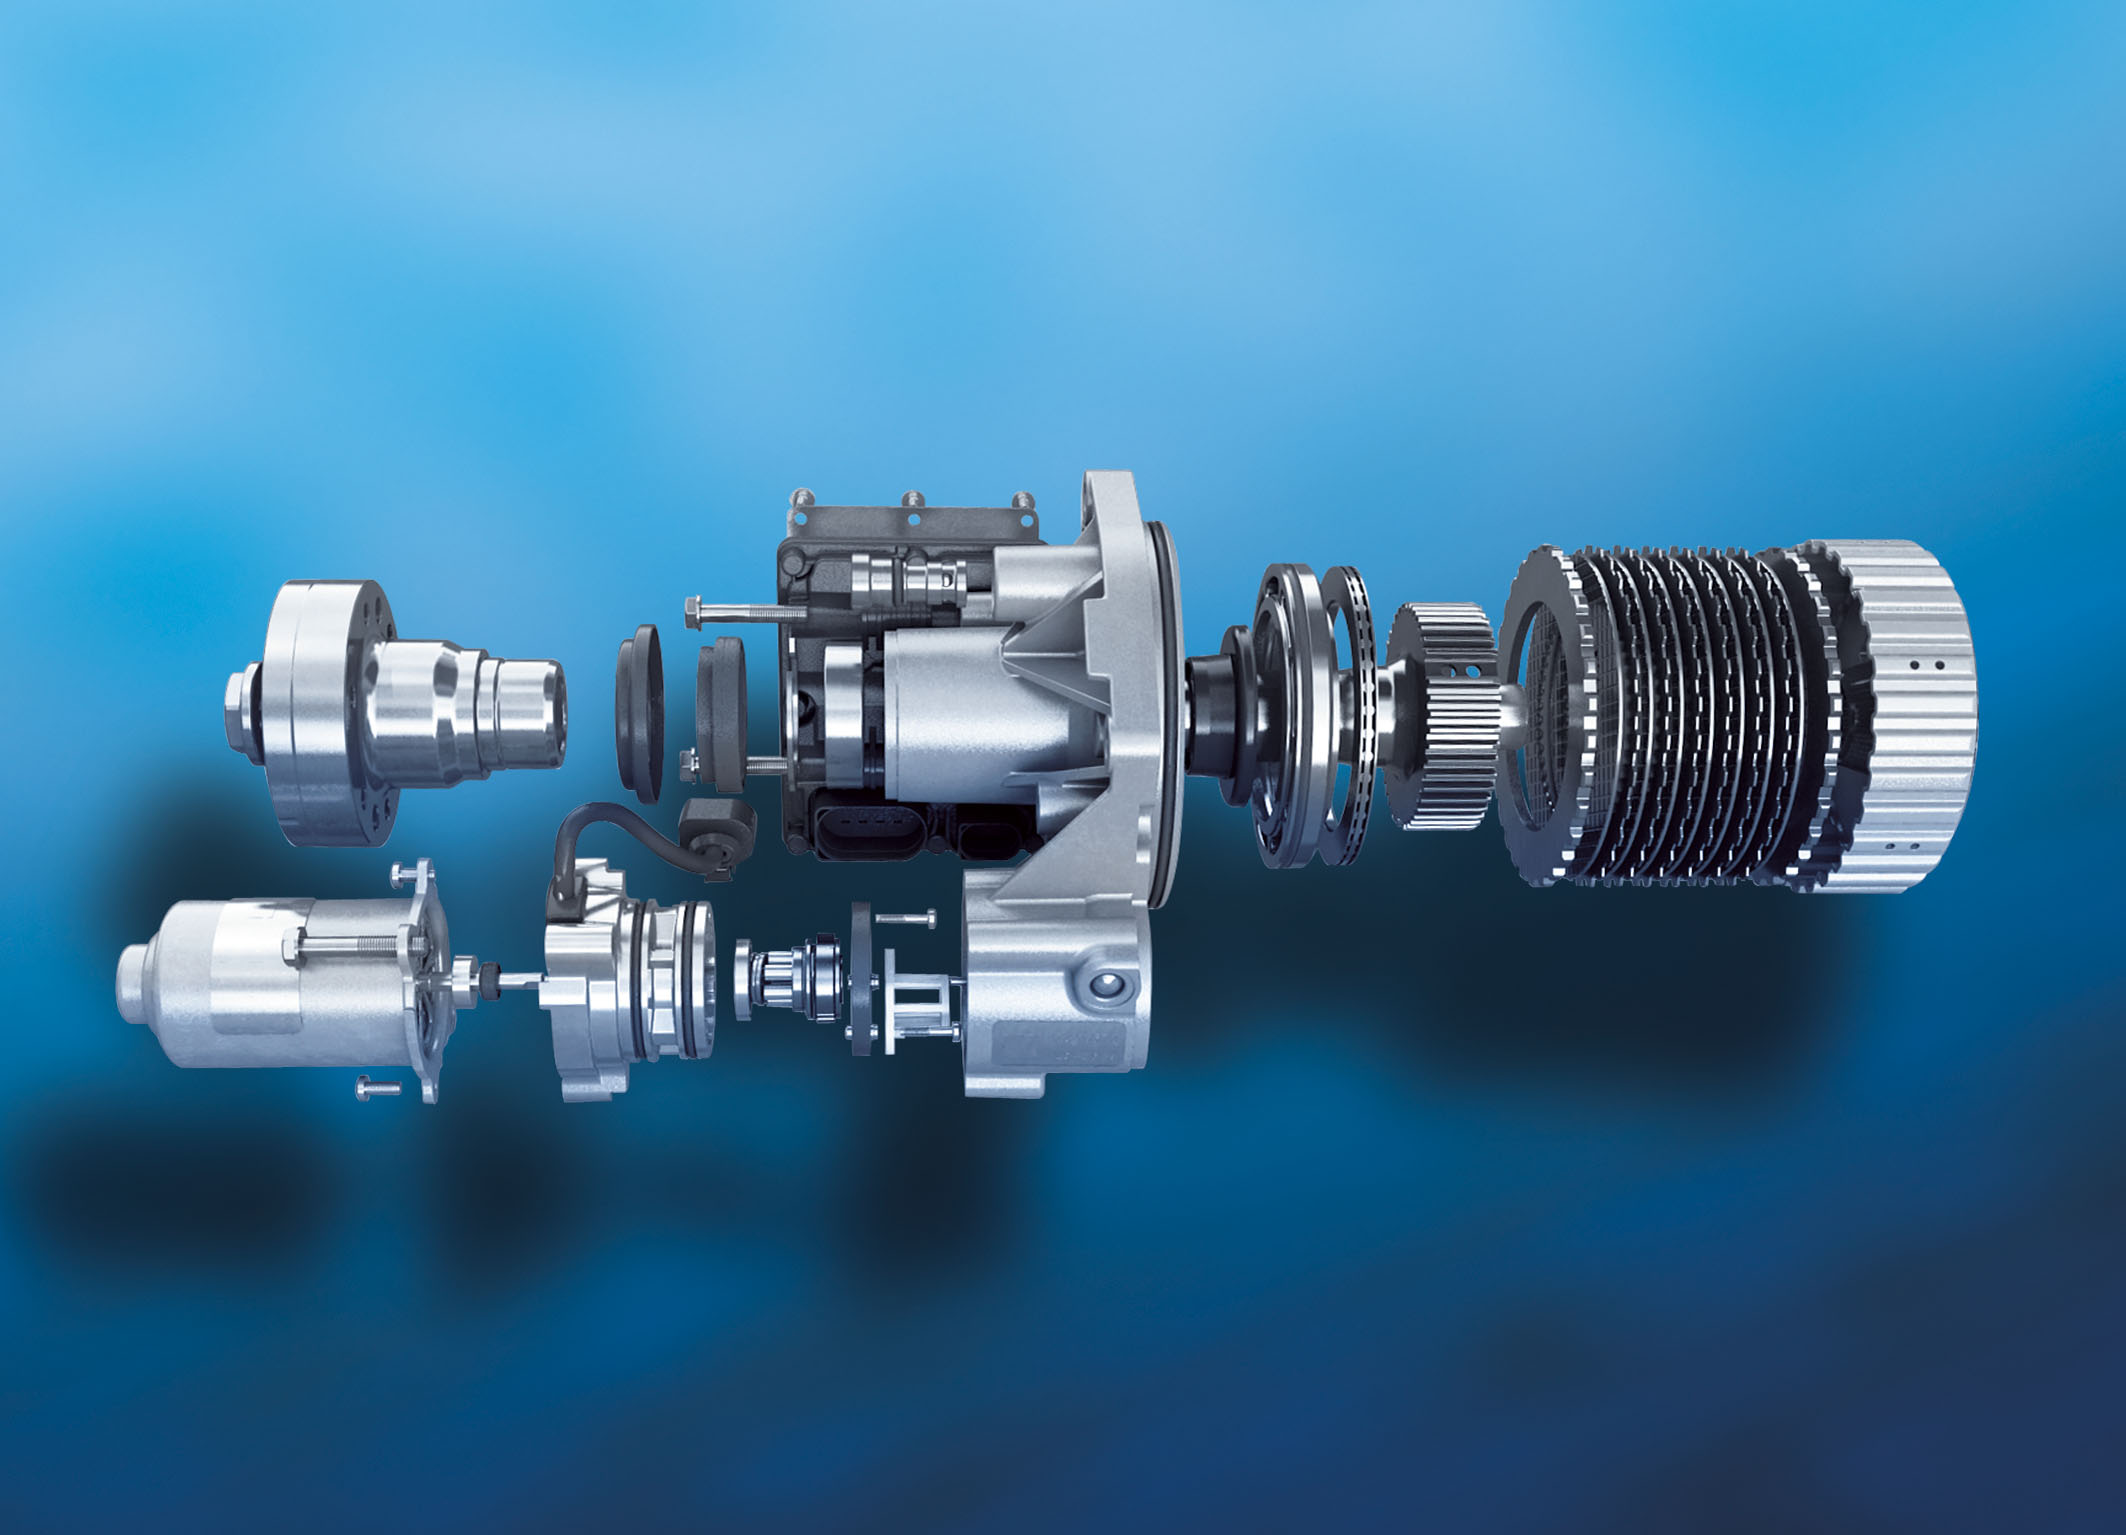 BorgWarner’s all-wheel drive coupling automatically distributes power between the front and the rear axle for improved traction, handling and fuel economy.